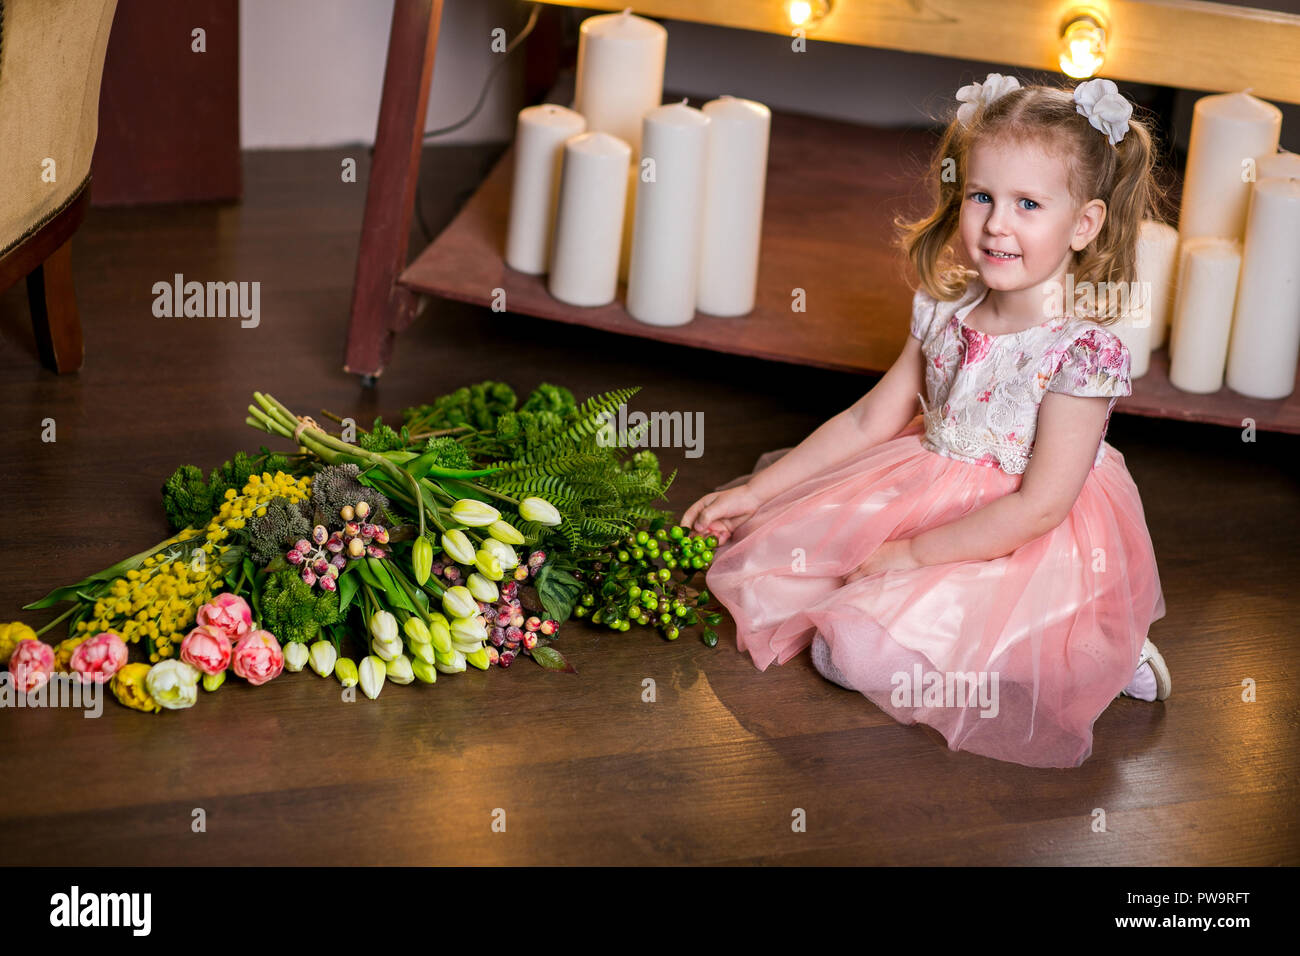 blue-eyed cute girl in a pink dress sits on the floor next to a bouquet of tulips, mimosa, berries and greenery Stock Photo